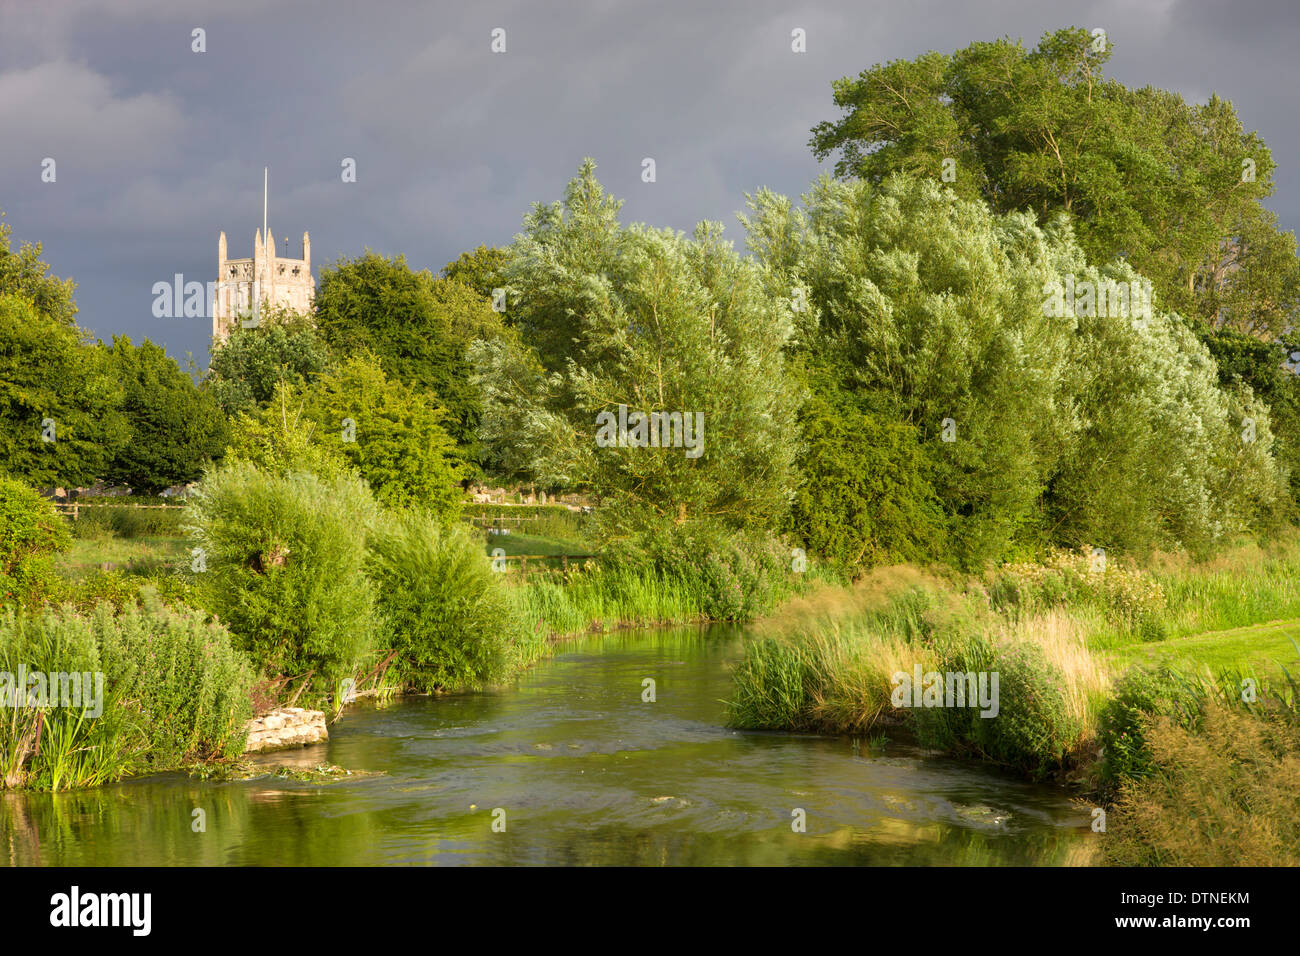 Evening sunlight illuminates Fairford Church and the River Coln in the Cotswolds, Gloucestershire, England. Summer (July) 2010. Stock Photo